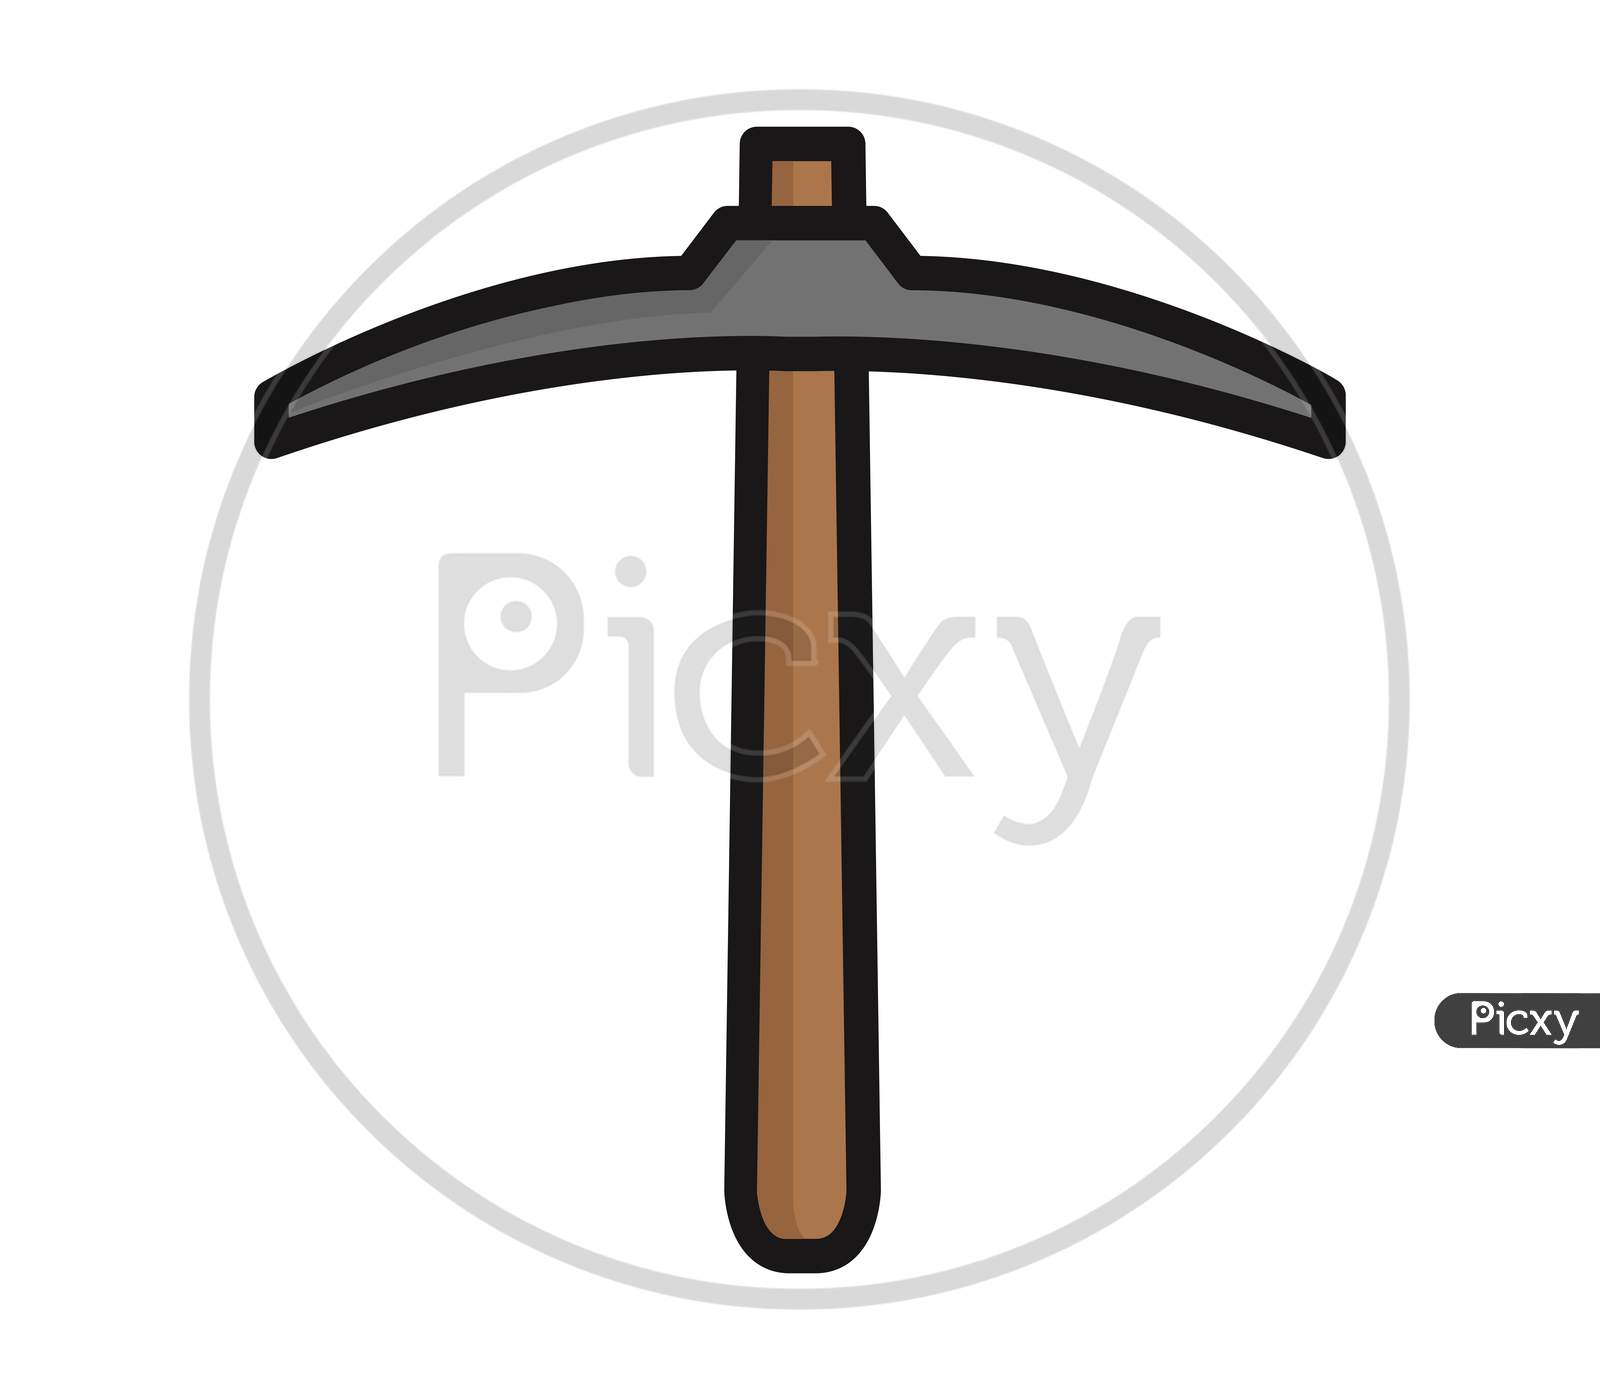 Pickaxe Icon Illustrated In Vector On White Background